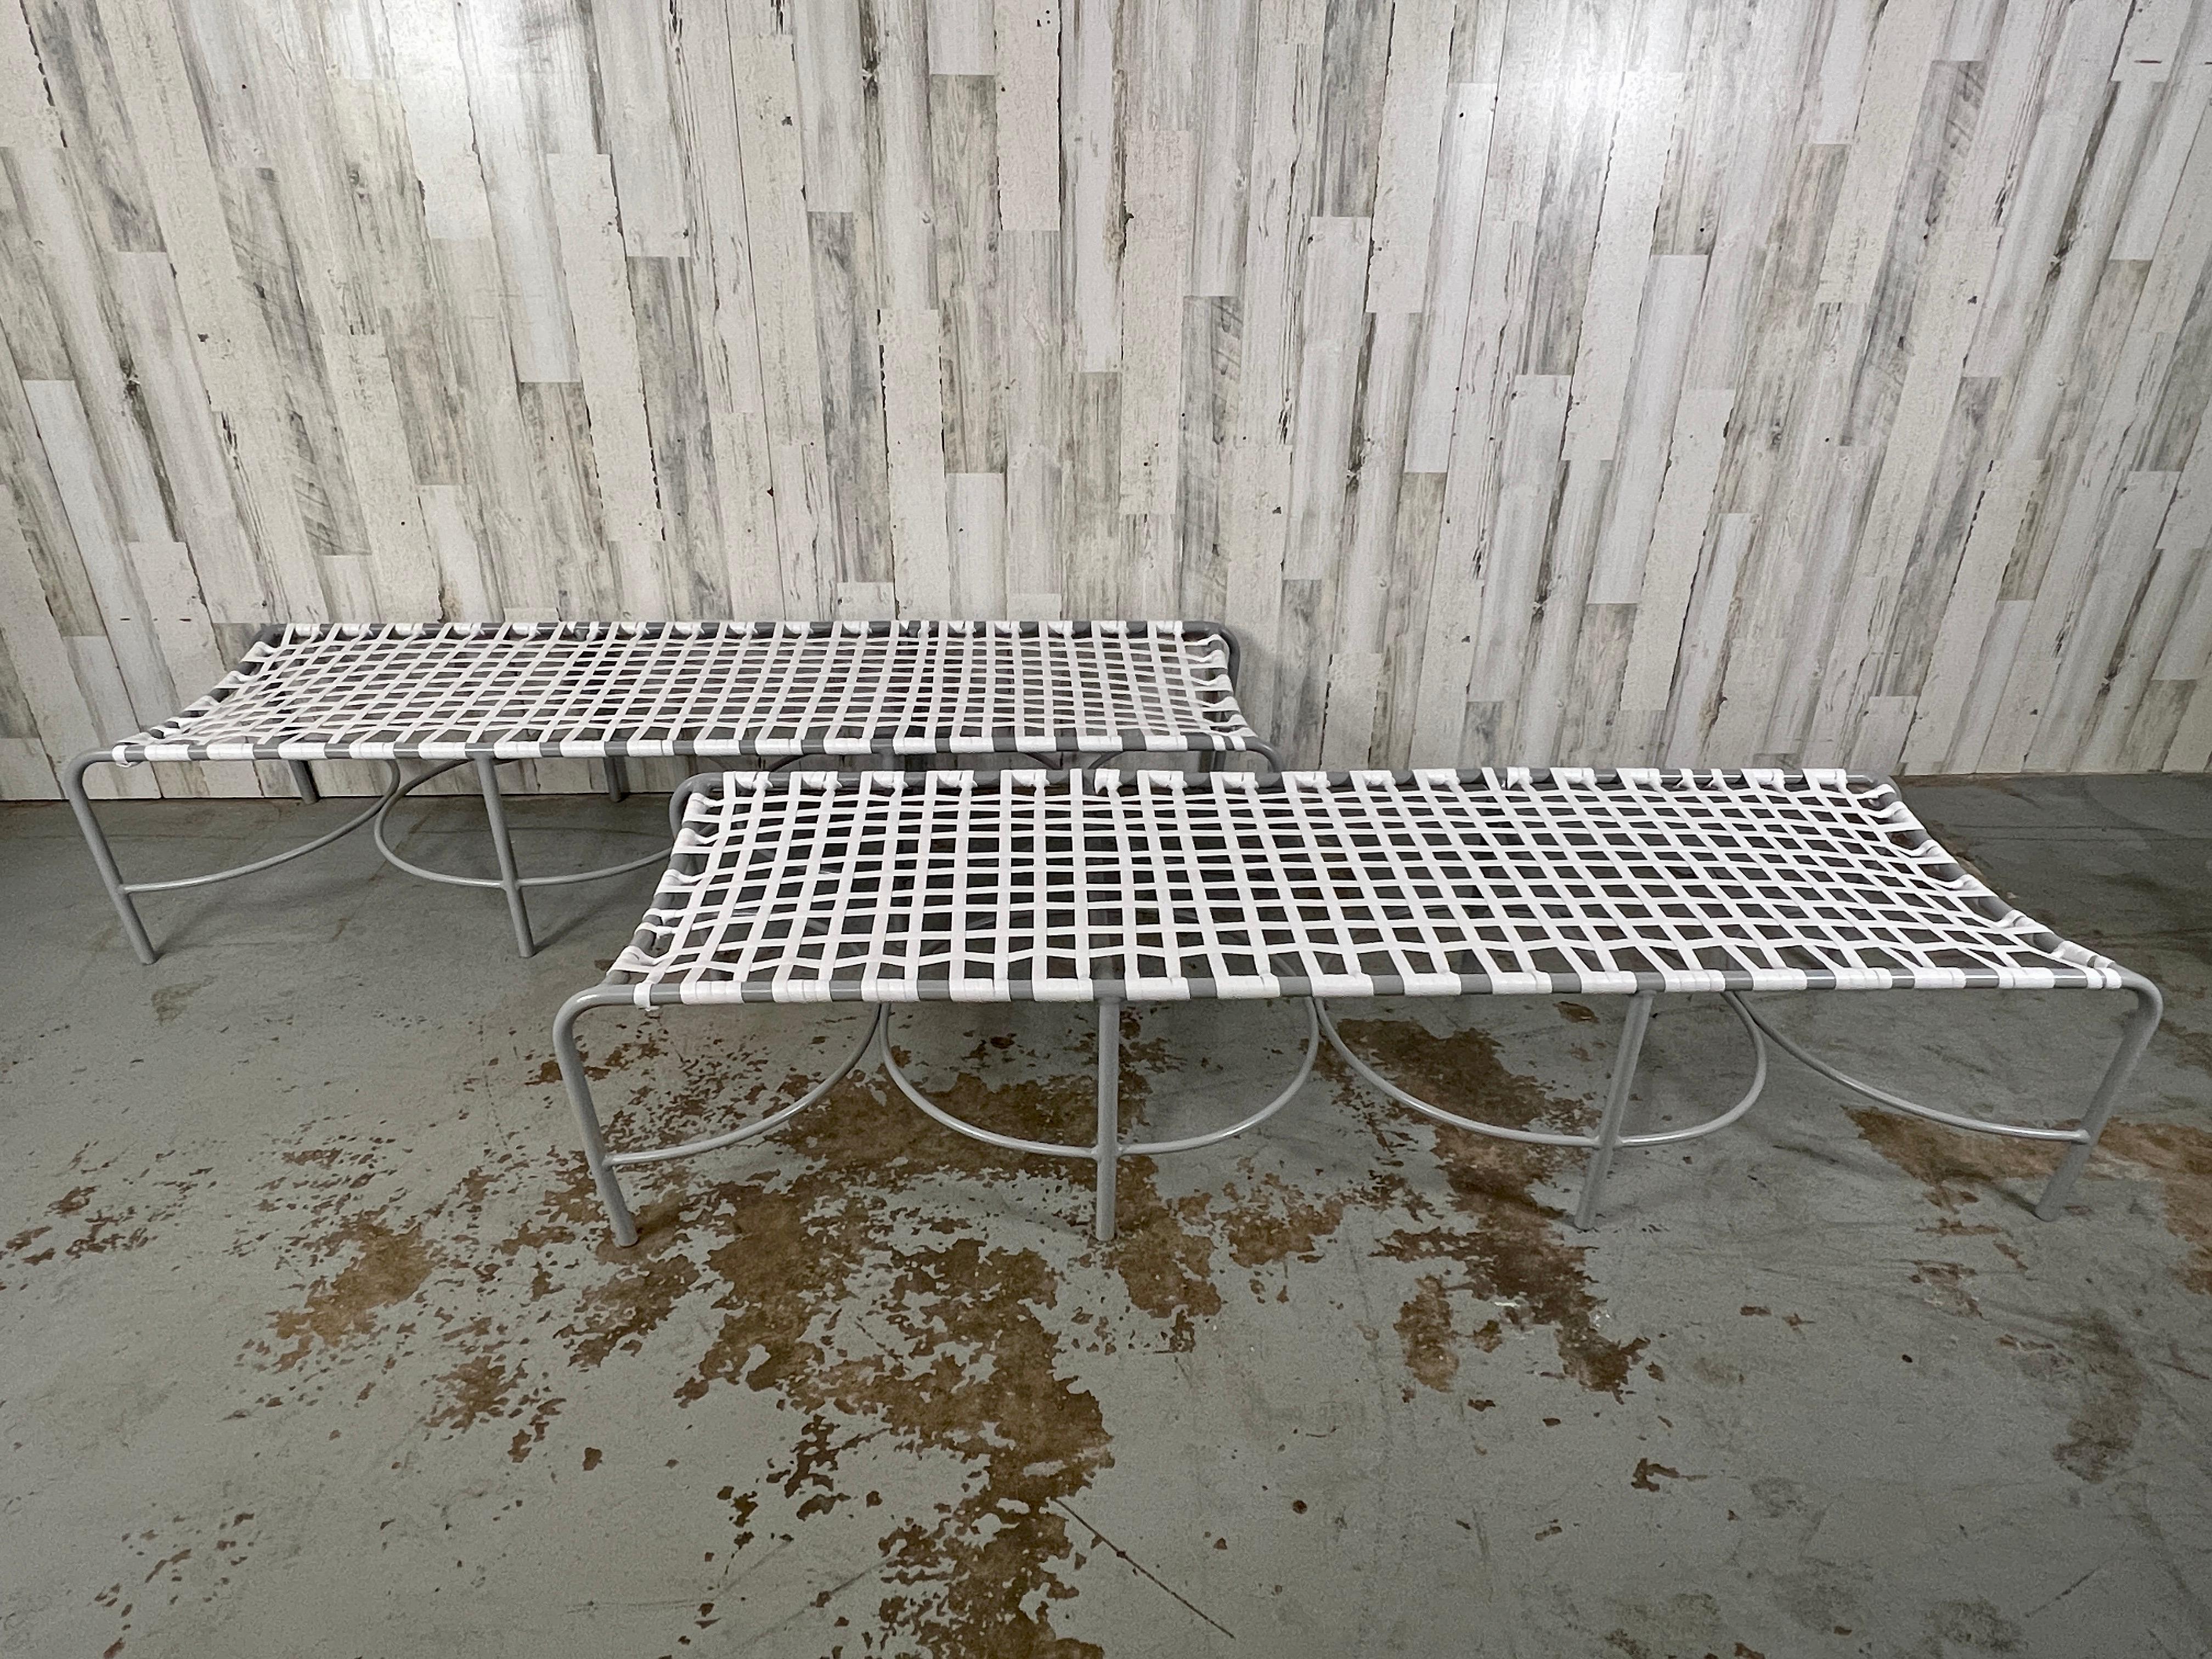 Hard to fend these rare benches.Designed by Tadao Inouye, Kantan Aluminum benches exemplifies the breezy spirit of patio life.   
The Japanese designer created his pivotal mid-century collection for Brown Jordan in 1956 using the latest lightweight